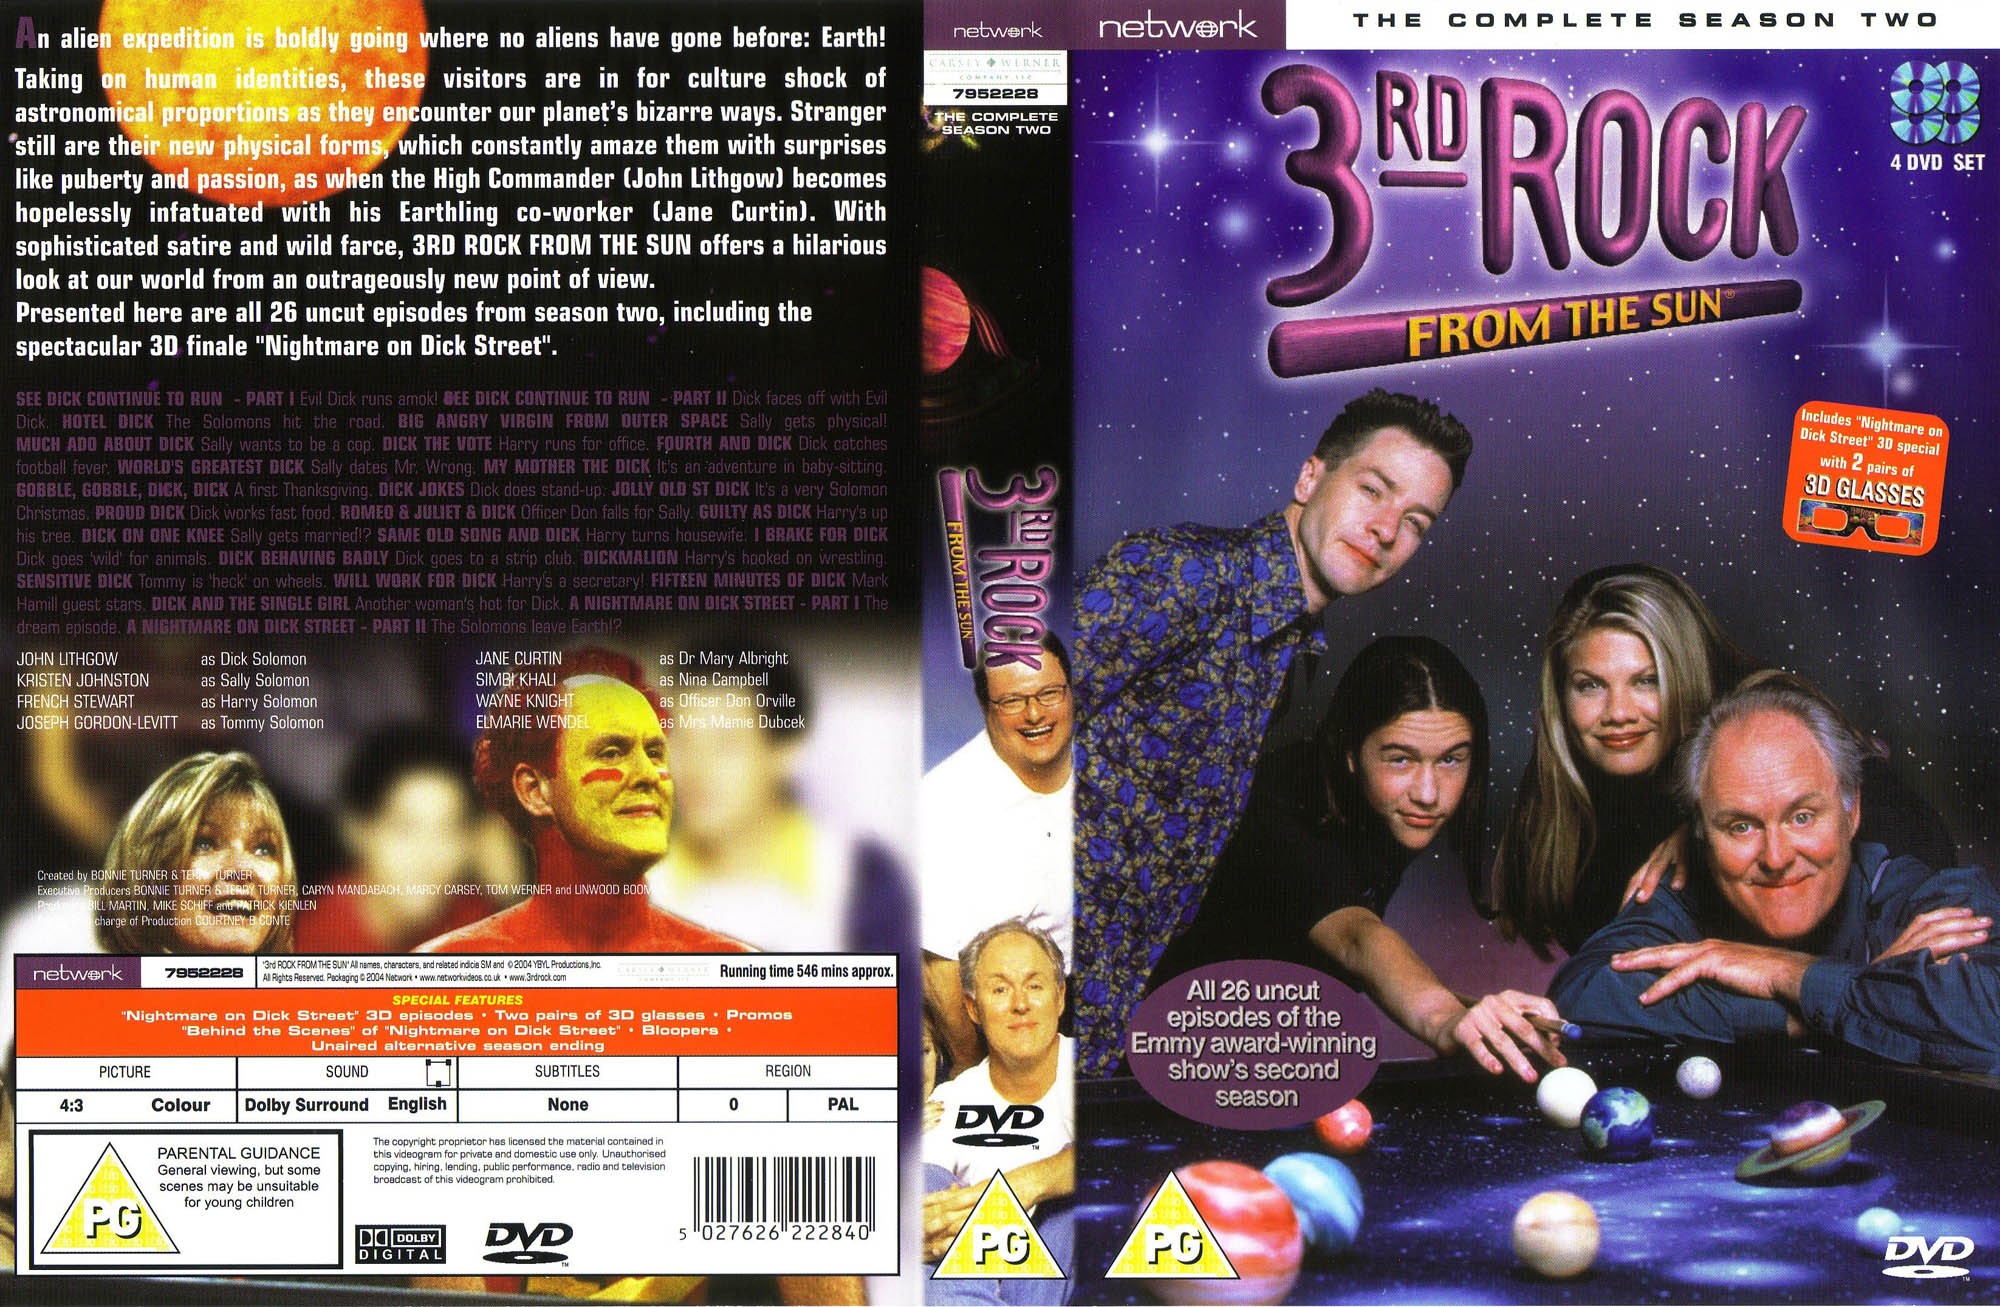 3rd Rock From The Sun Season 2 - front.